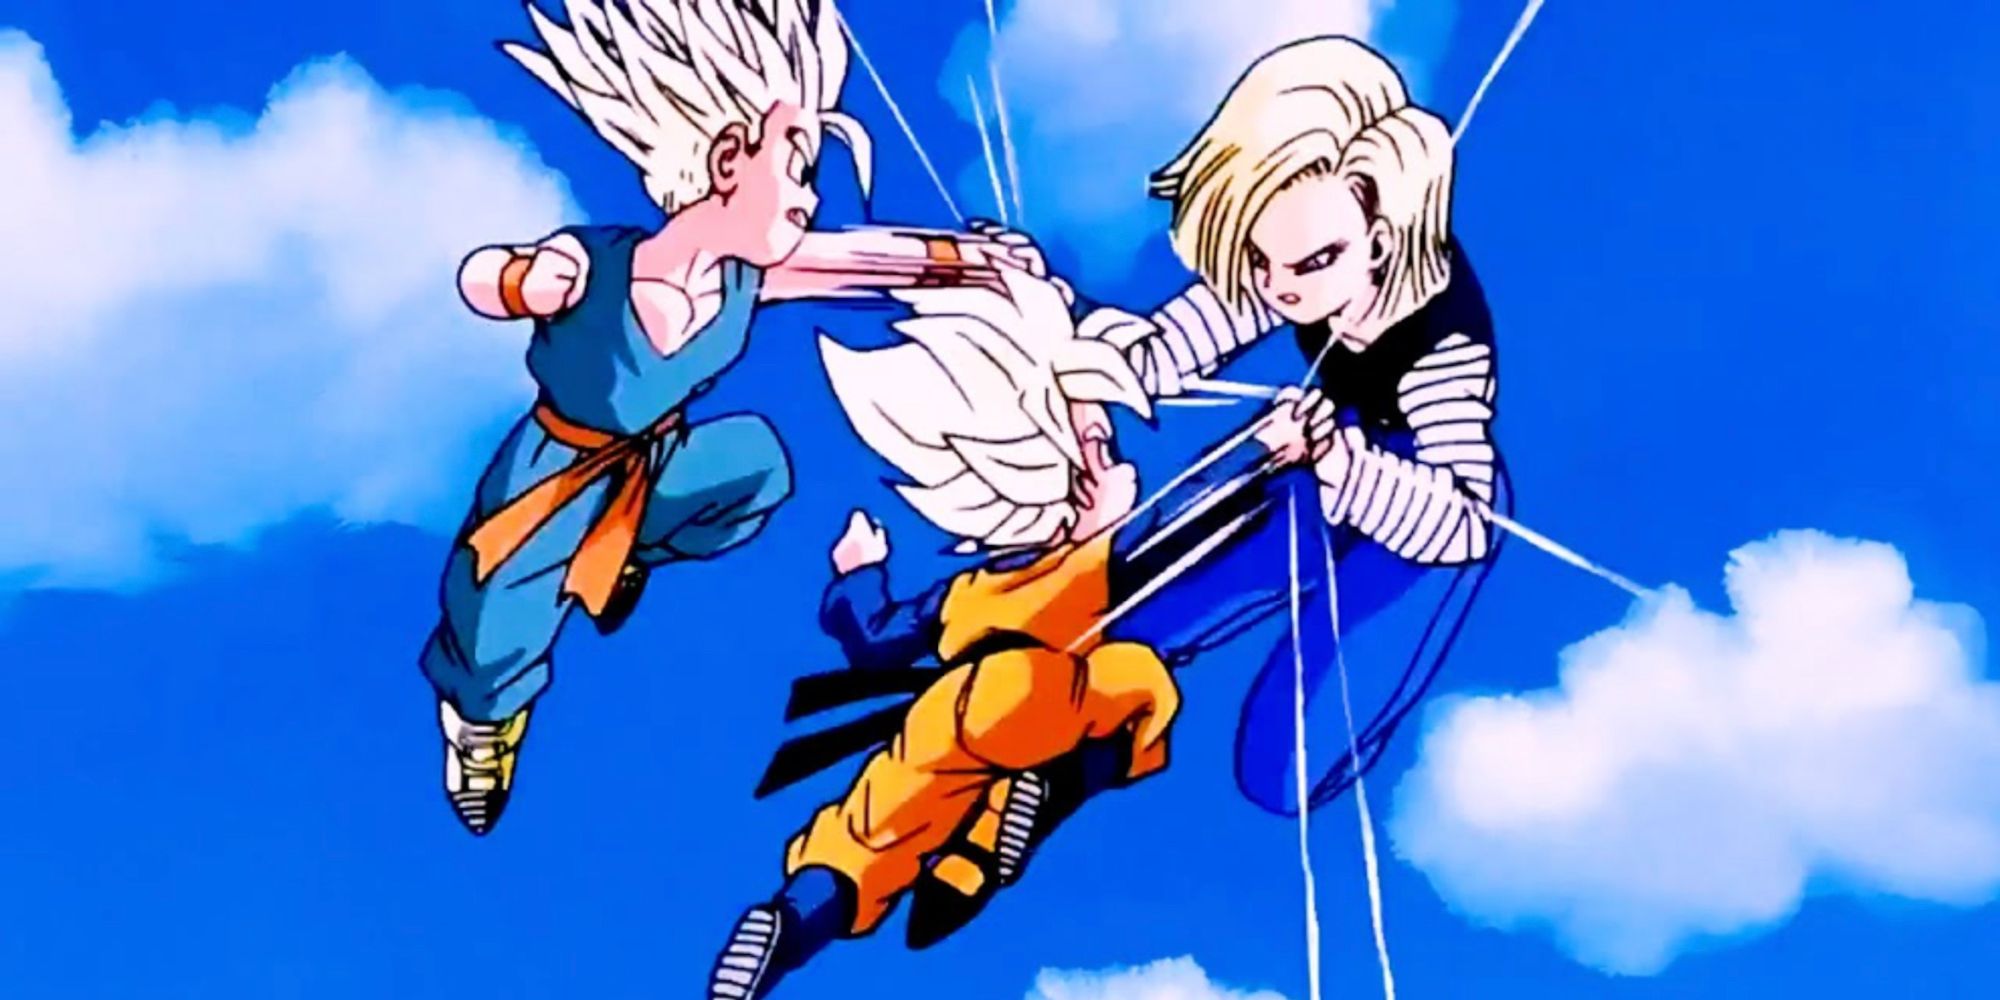 Android 18 spars with Super Saiyan Goten and Trunks in Dragon Ball Z